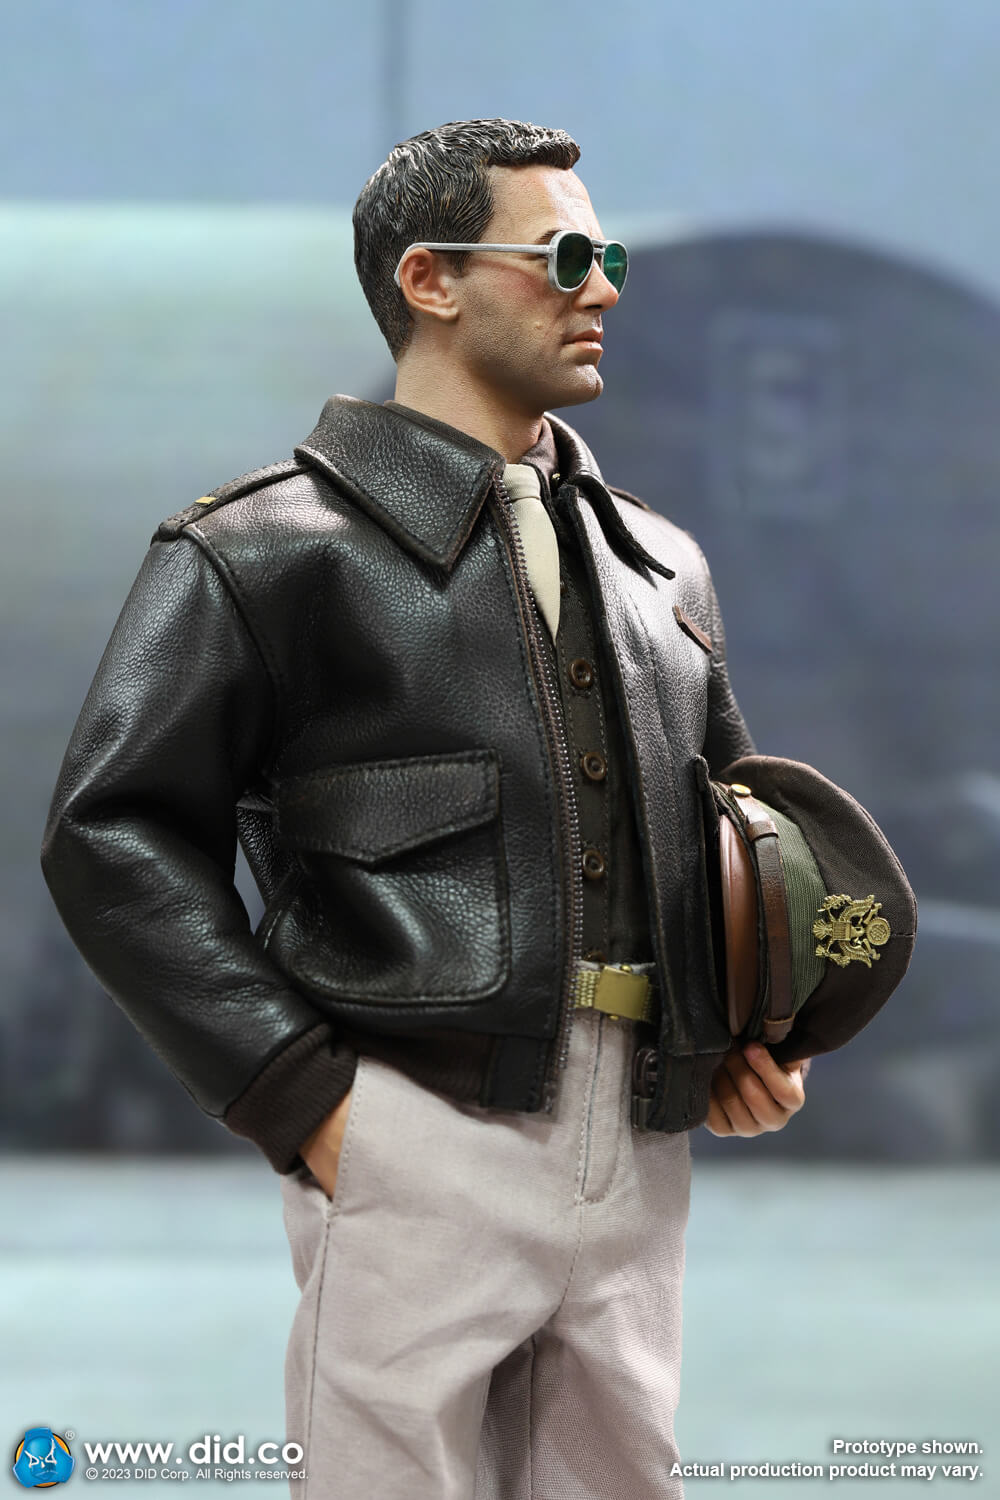 newproduct - NEW PRODUCT: DiD: A80167 WWII United States Army Air Forces Pilot – Captain Rafe 2720